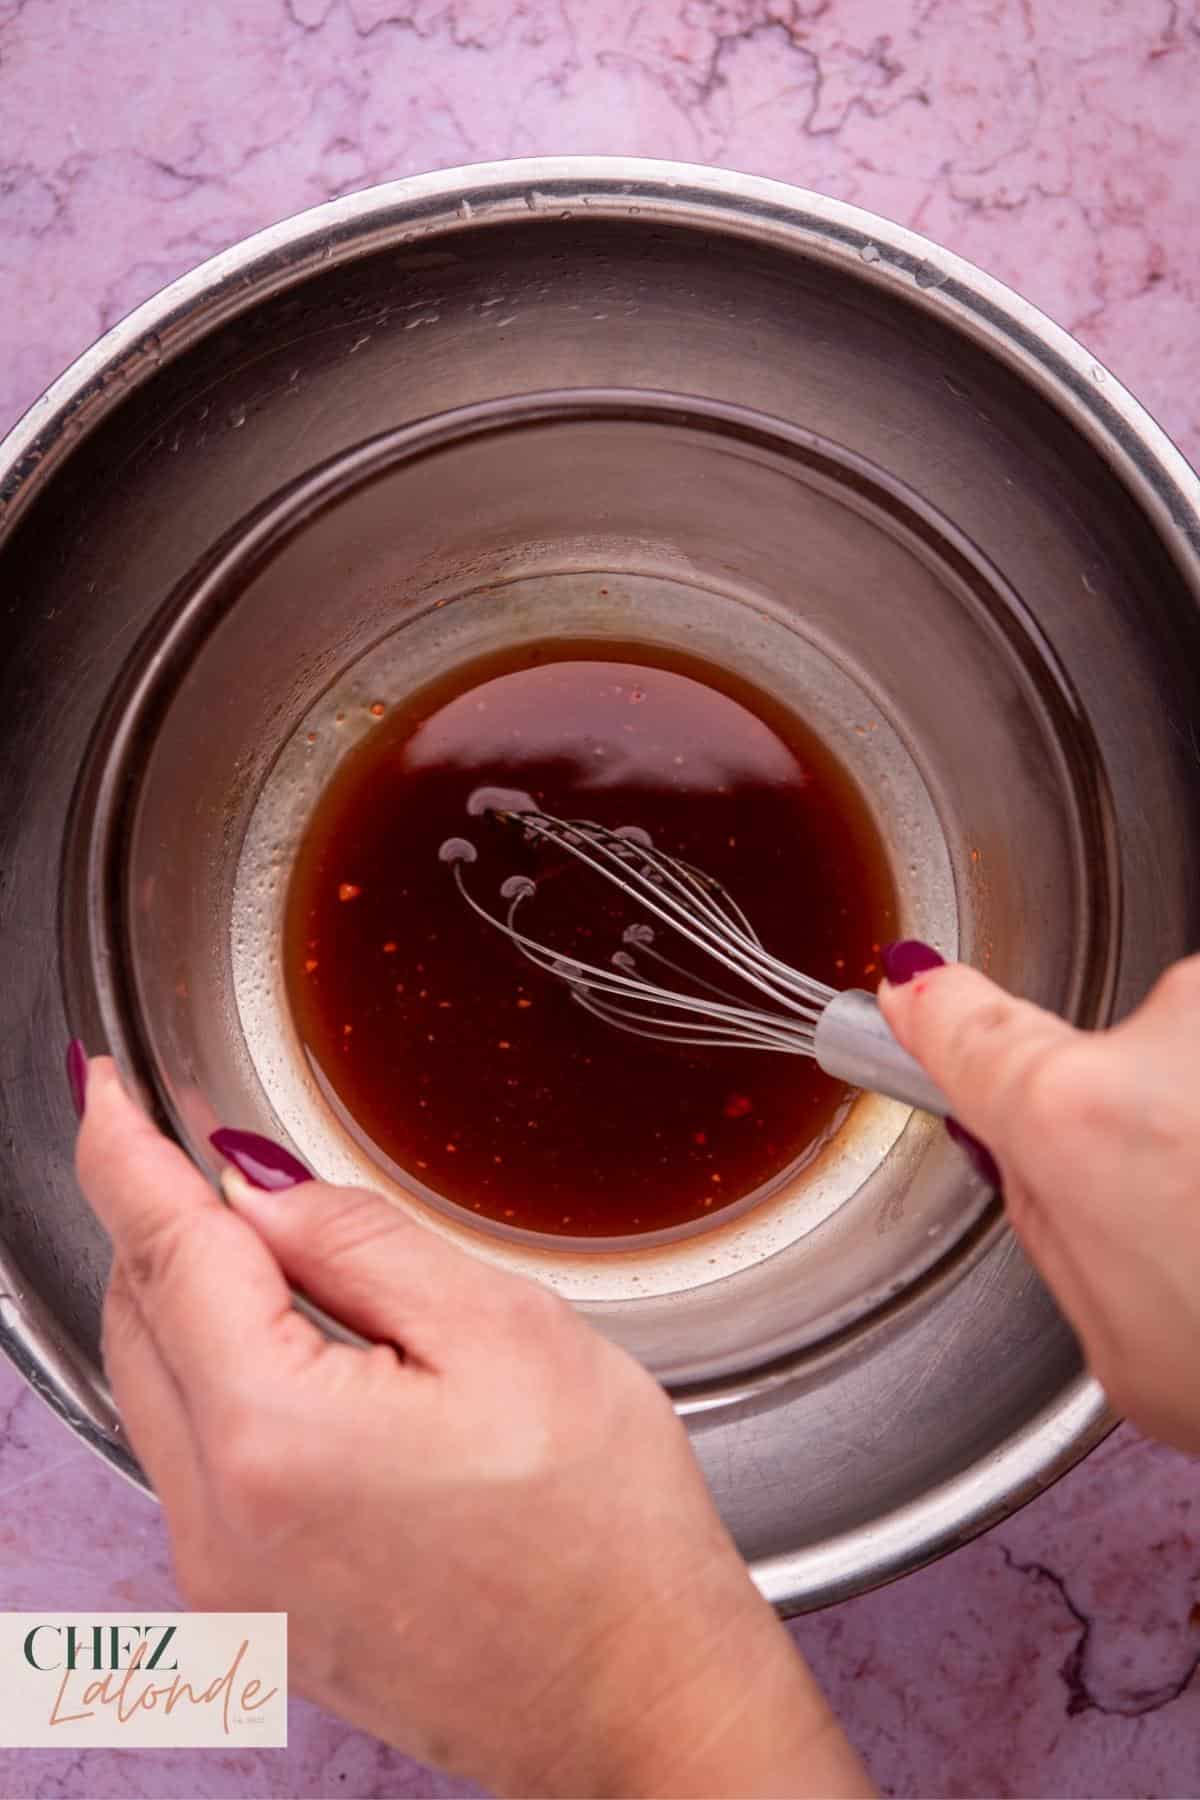 Note that maltose syrup tends to be thick and challenging to blend with the marinade. To ease this process, consider placing the mixing bowl in a warm water bath to help the syrup dissolve more swiftly. Whisk the mixture until a cohesive blend is achieved, then set it aside for future use.